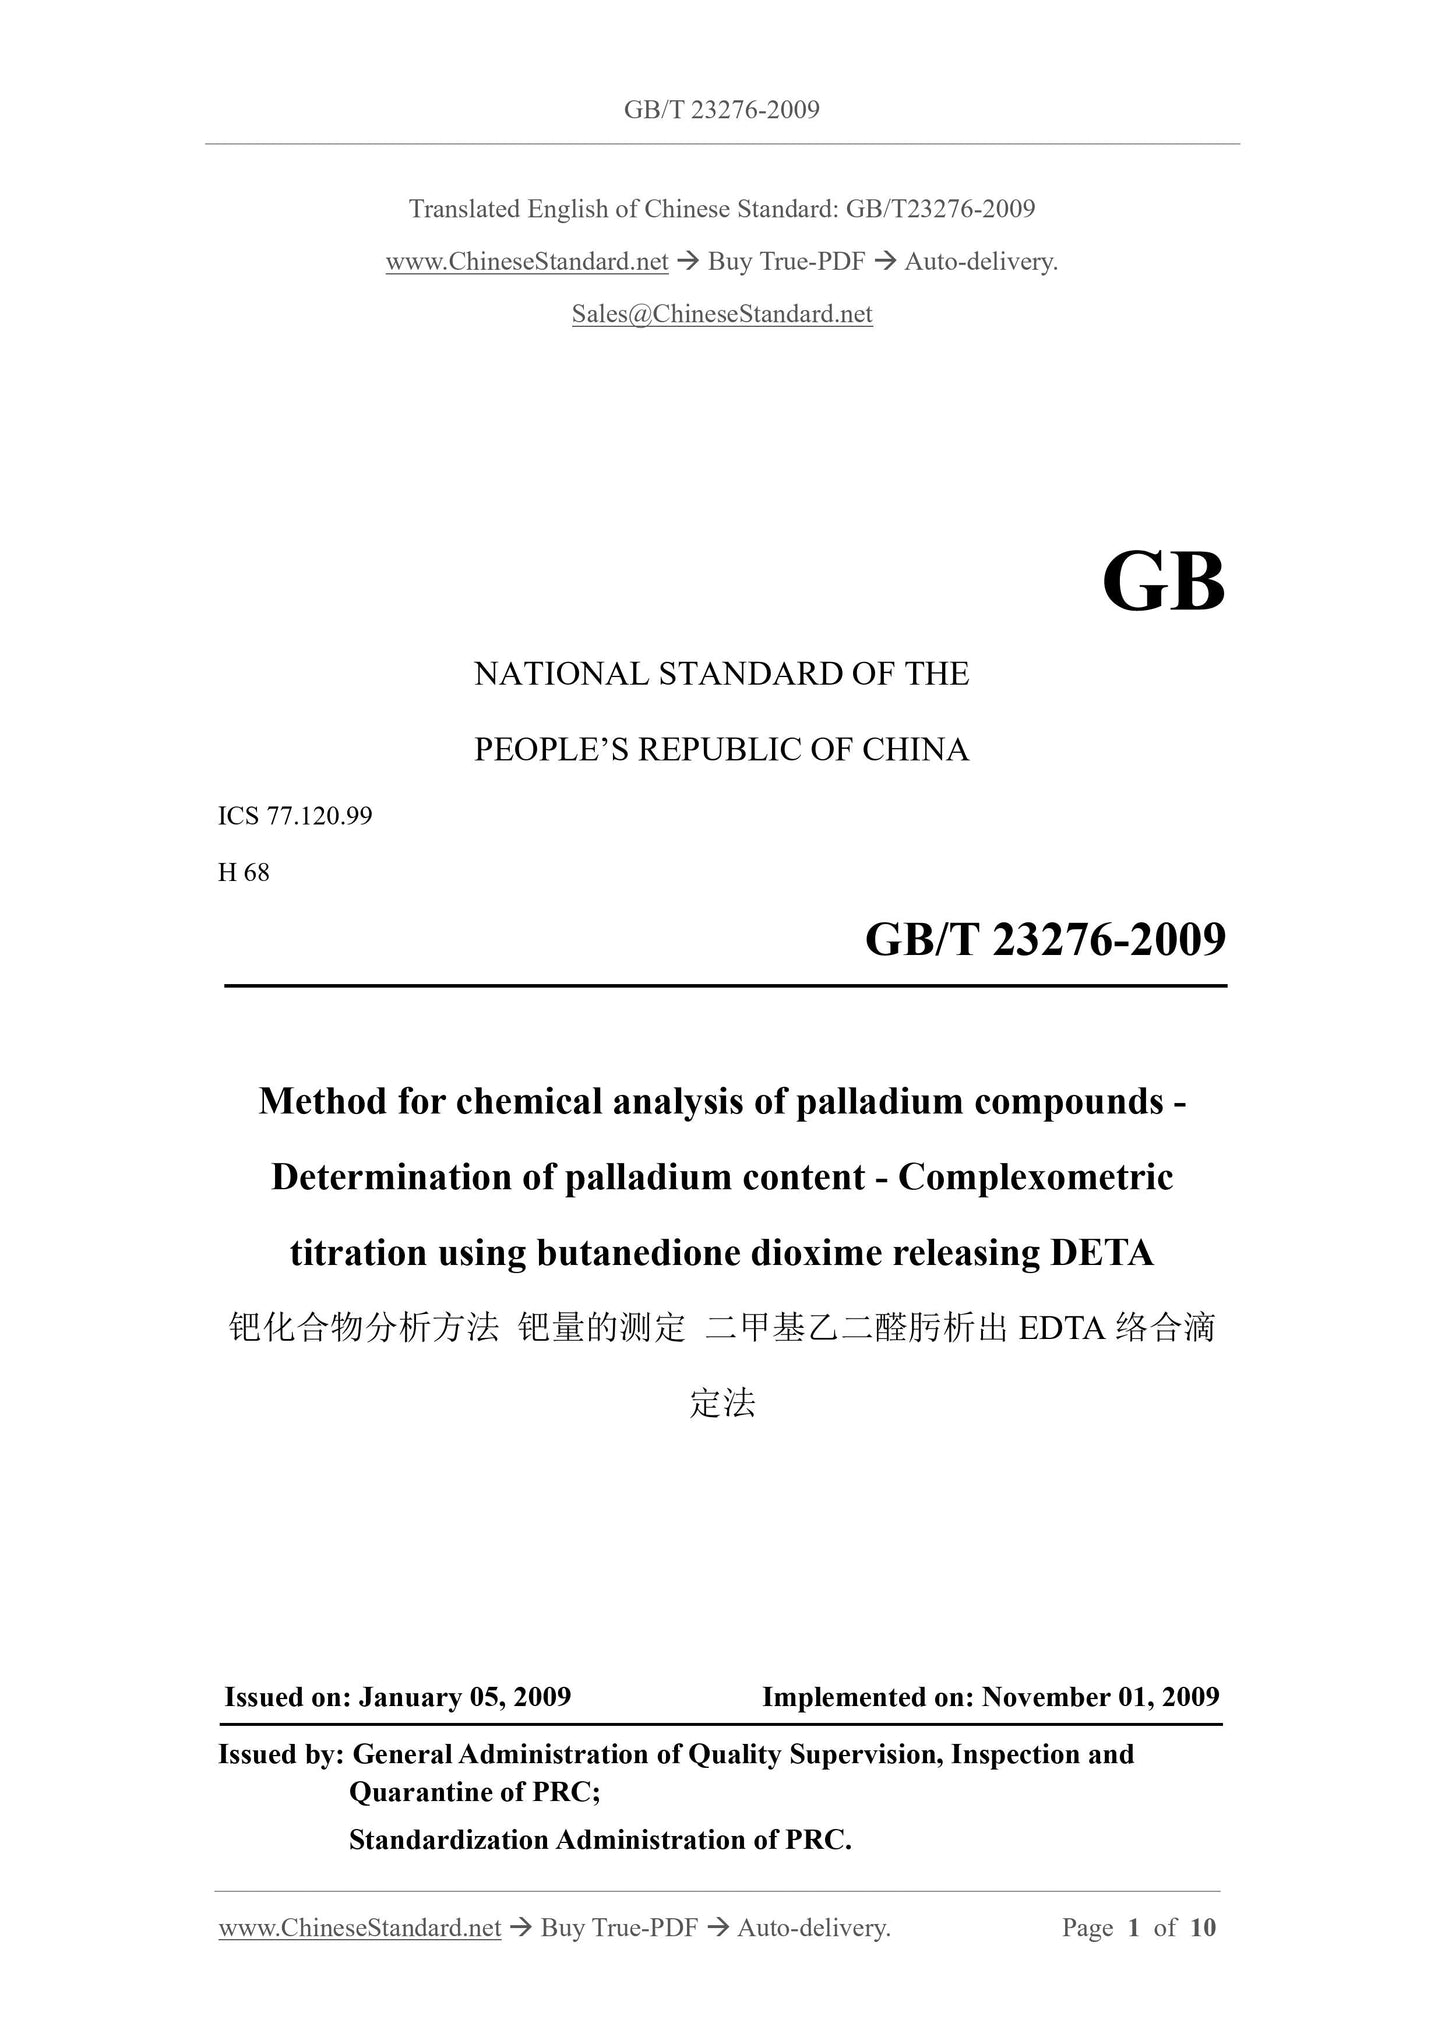 GB/T 23276-2009 Page 1